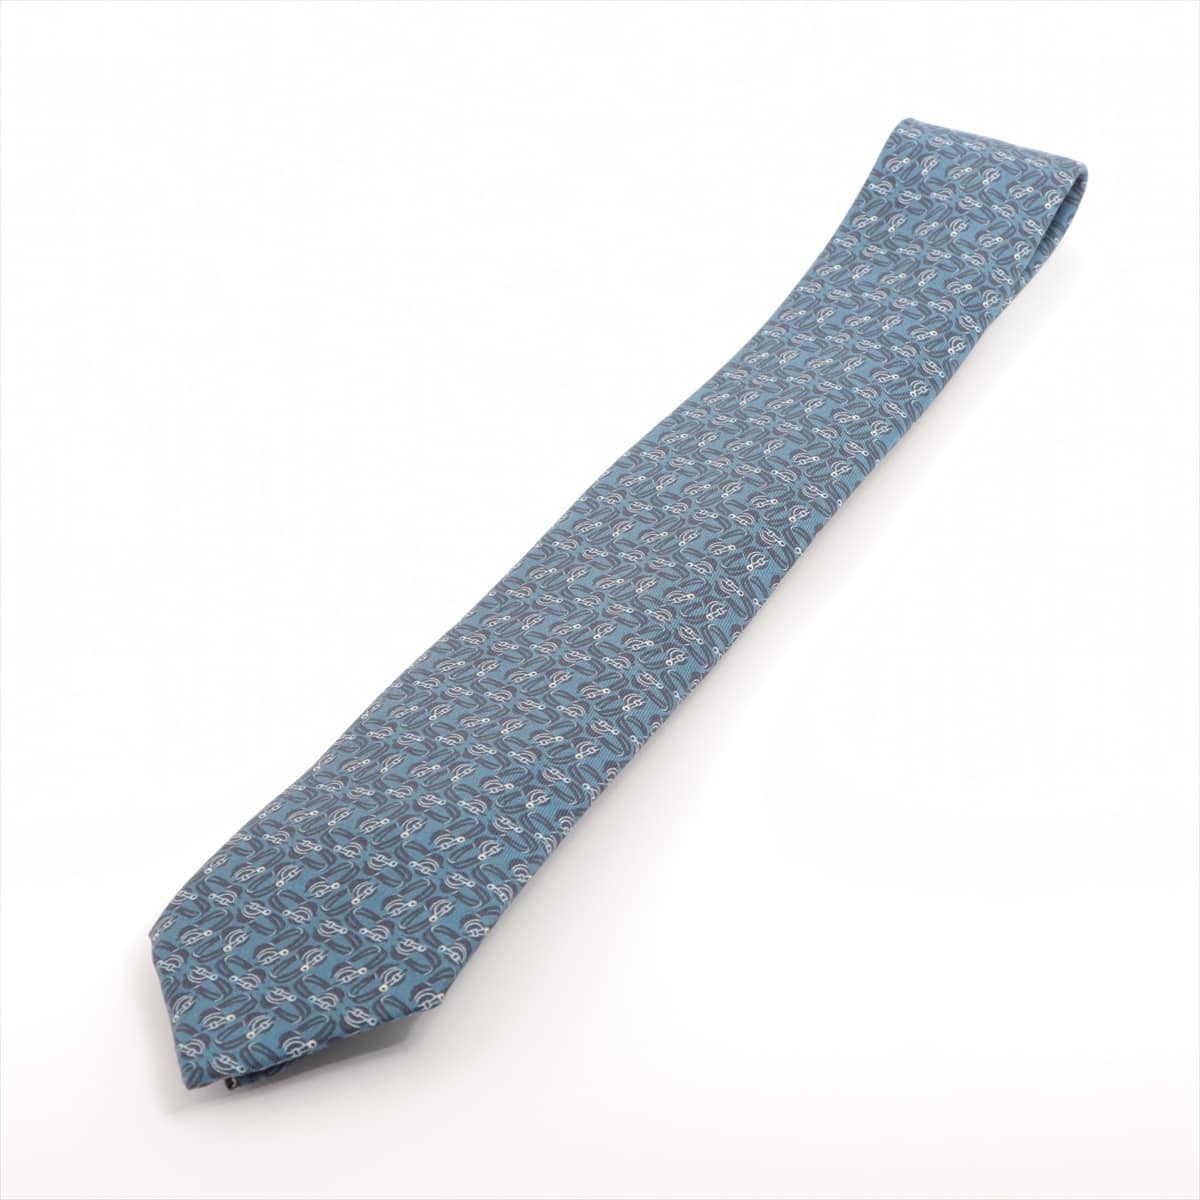 Hermès Necktie Silk Blue There is color fading throughout the thread